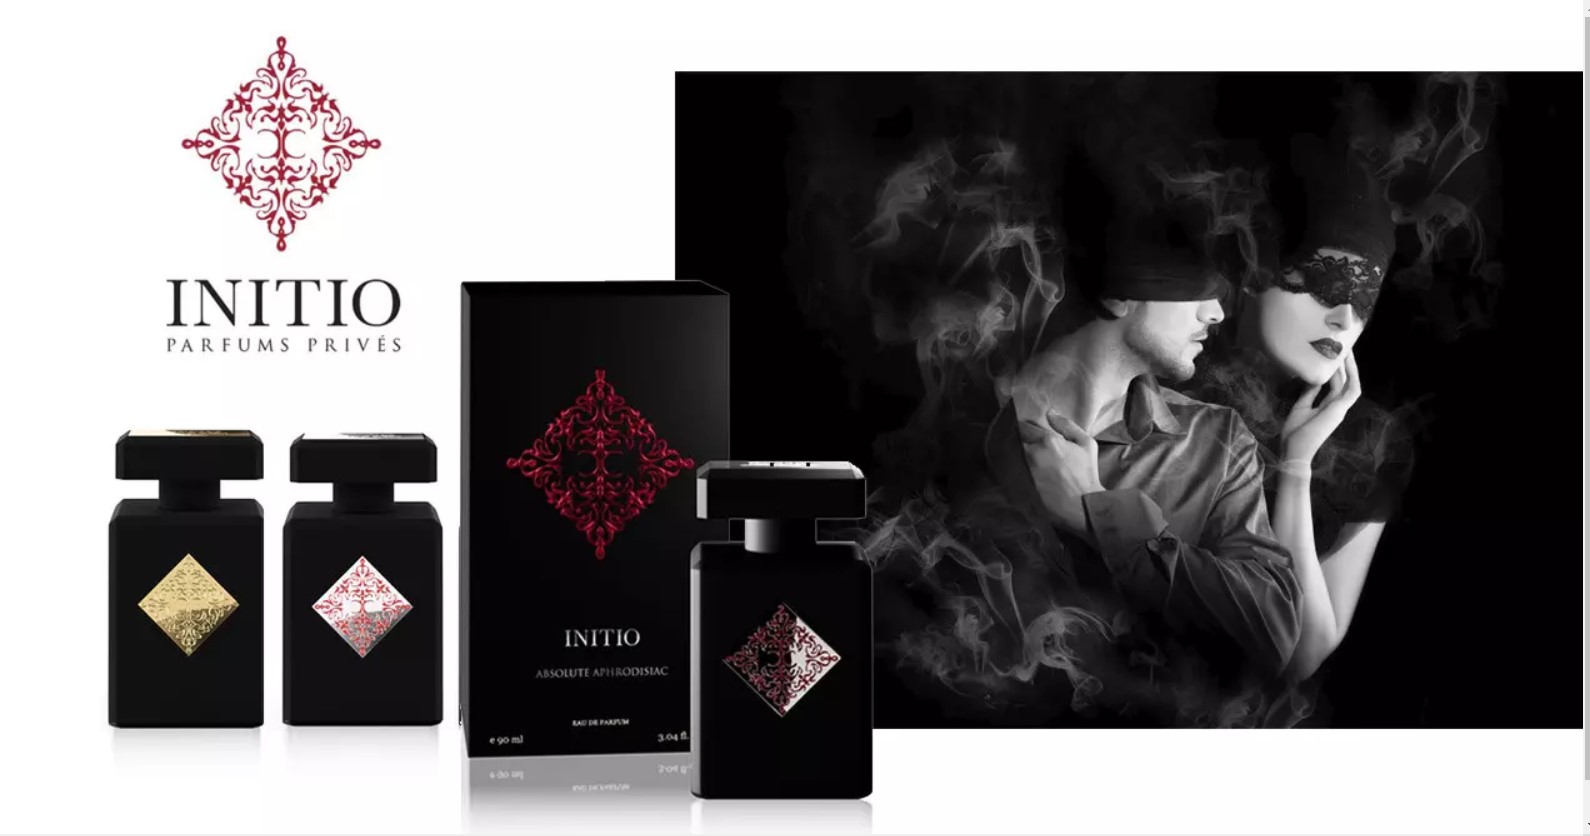 Absolute Aphrodisiac Initio Parfums Prives for women and men commercial poster iki manken.jpg